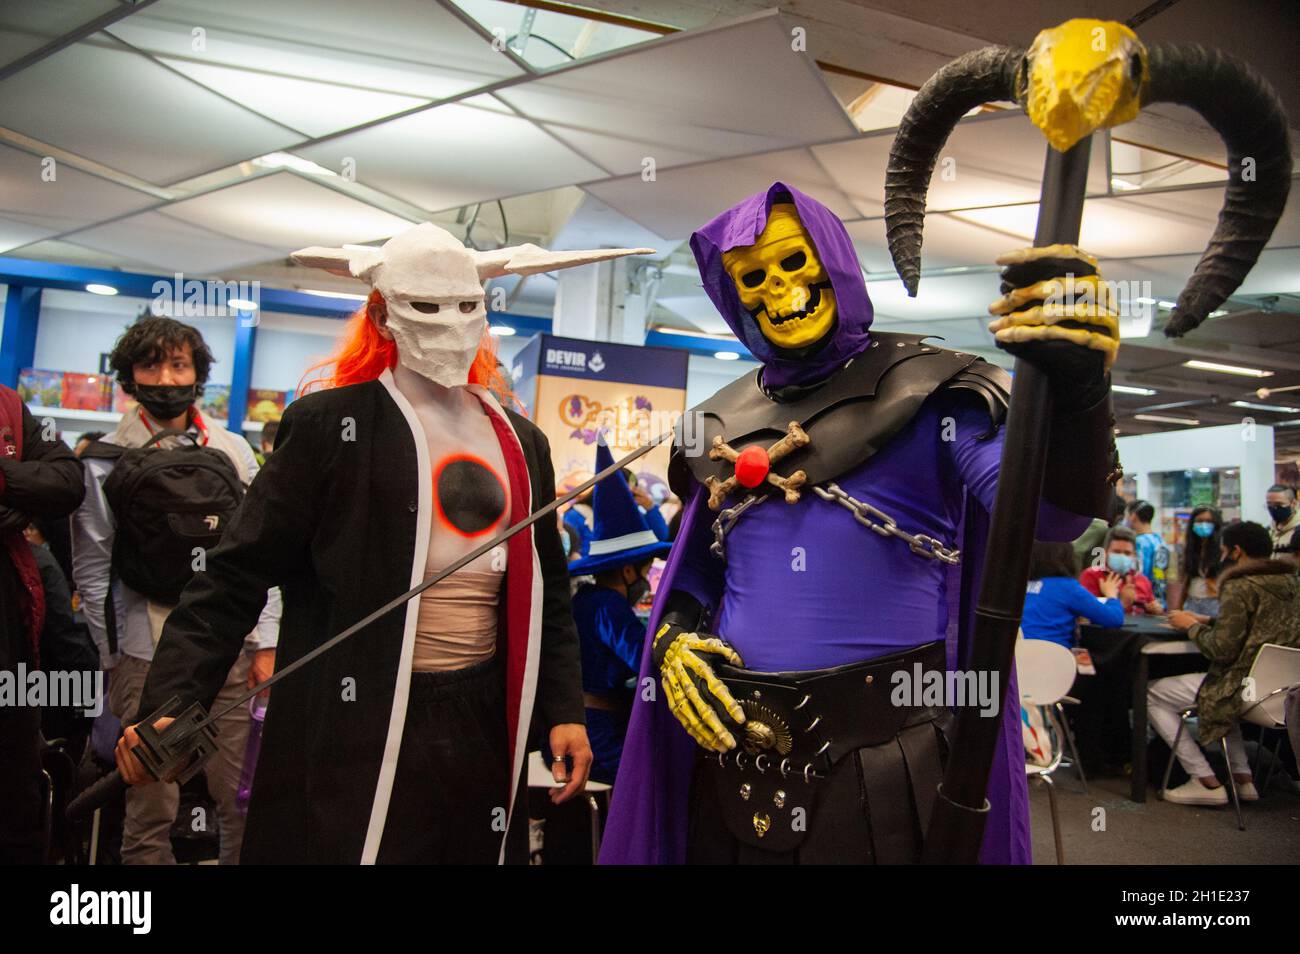 A fan of Hee-Man poses for a photo using a costume of Skeletor during the fourth day of the SOFA (Salon del Ocio y la Fantasia) 2021, a fair aimed to Stock Photo